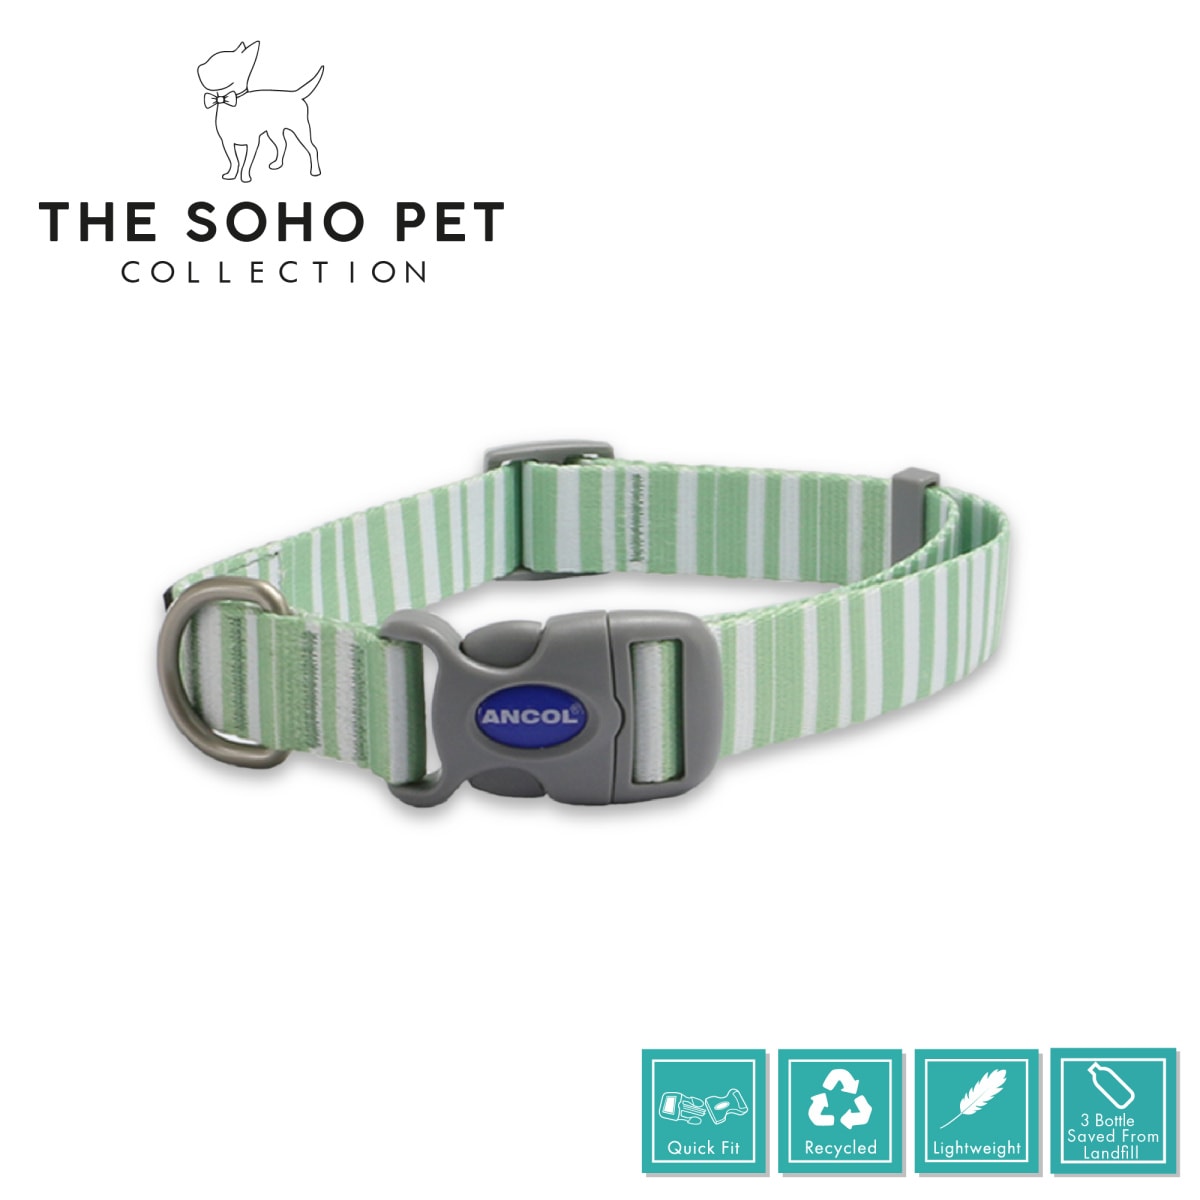 Soho Collection - Stripe Patterned Collar Main Image